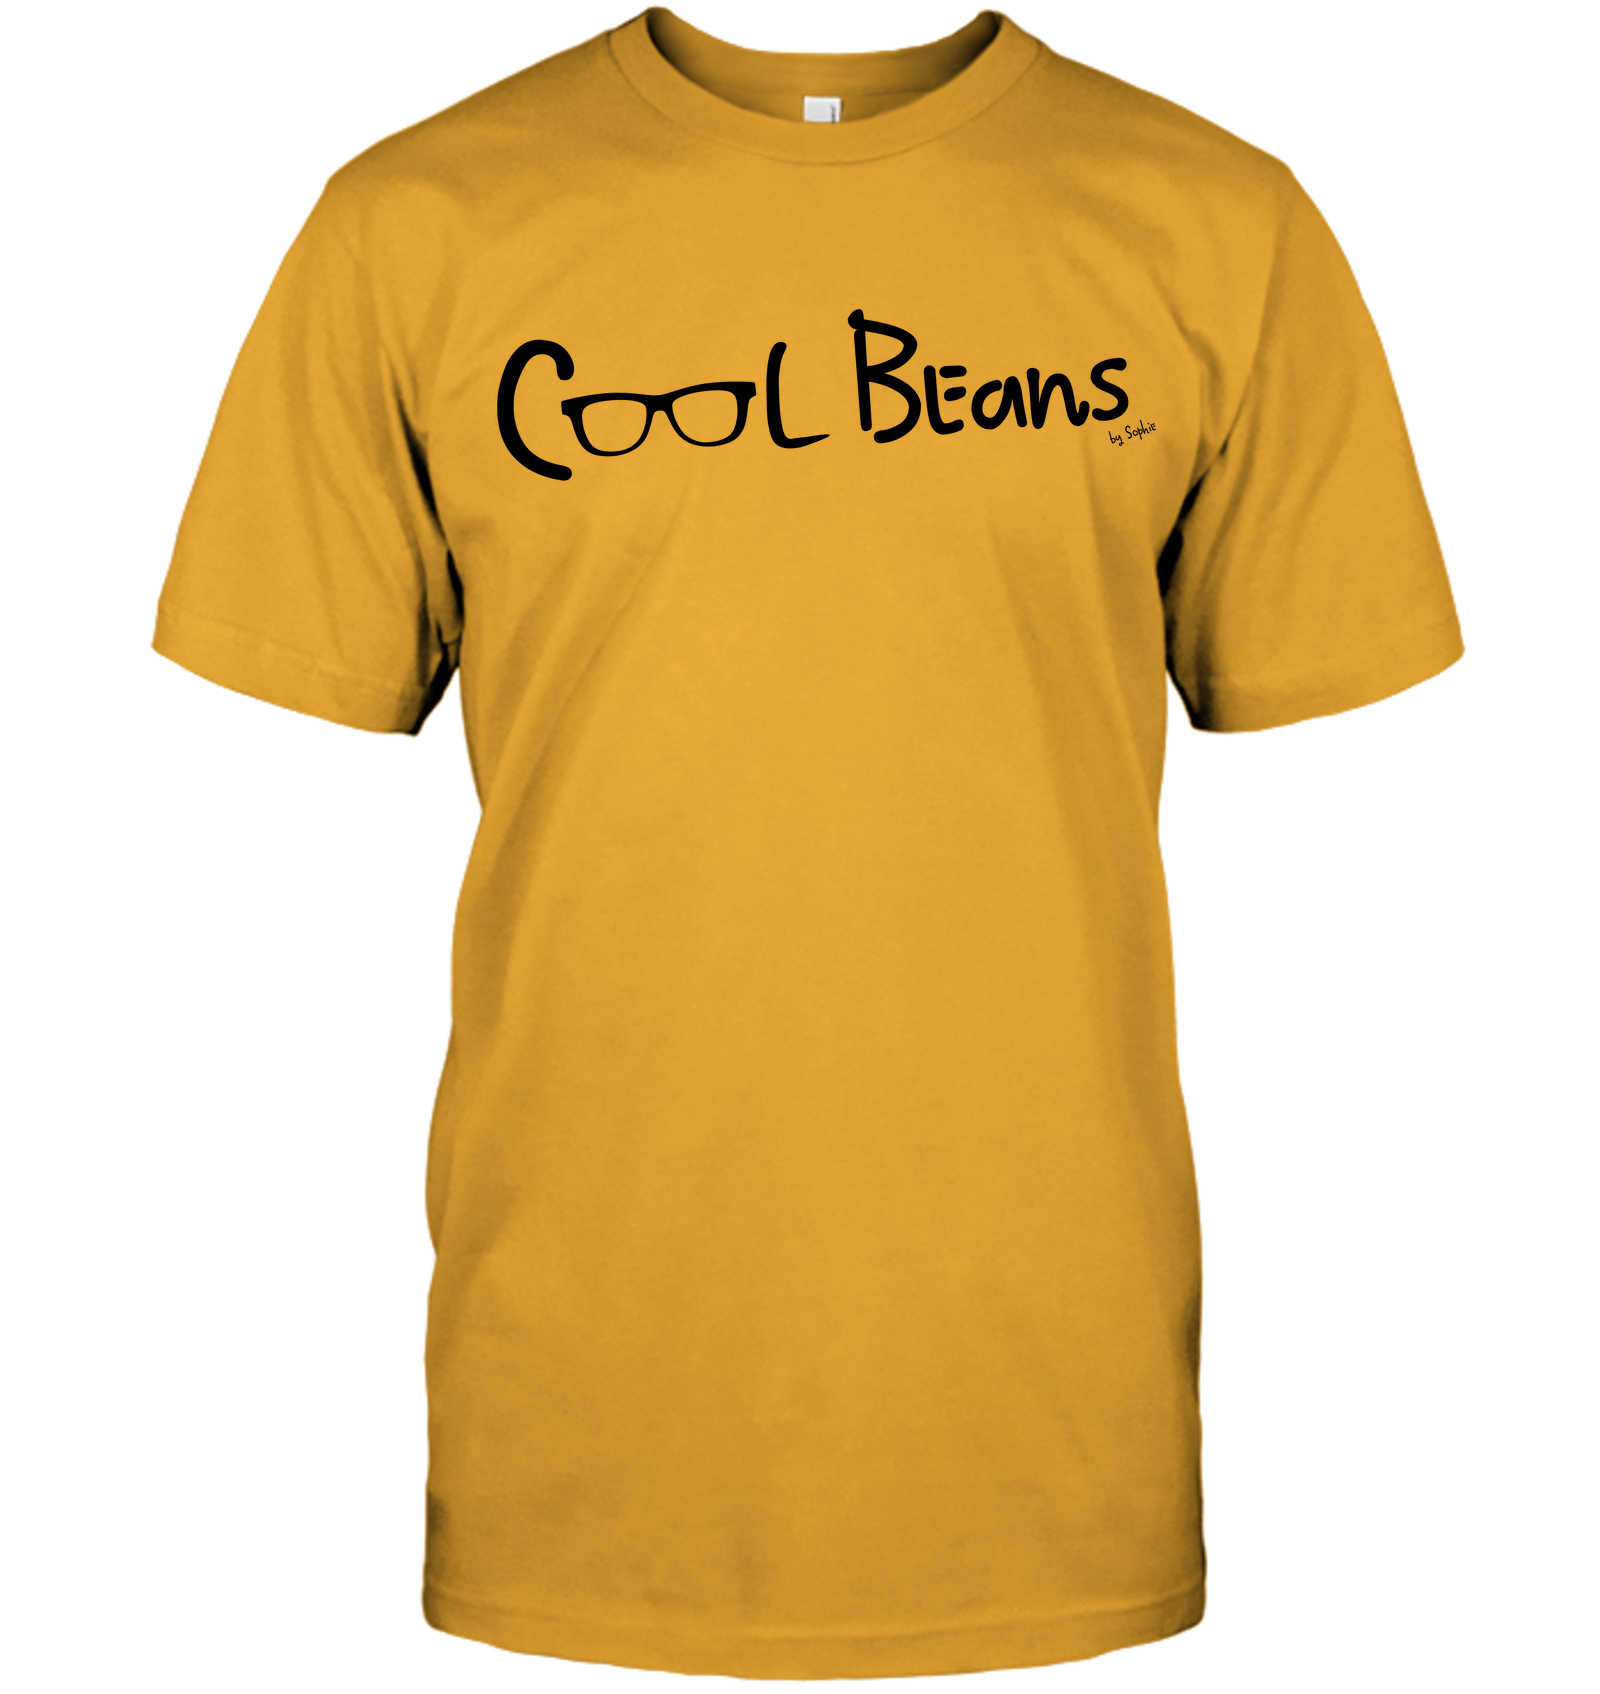 Cool Beans - Black (Style 2) - Hanes Adult Tagless® T-Shirt